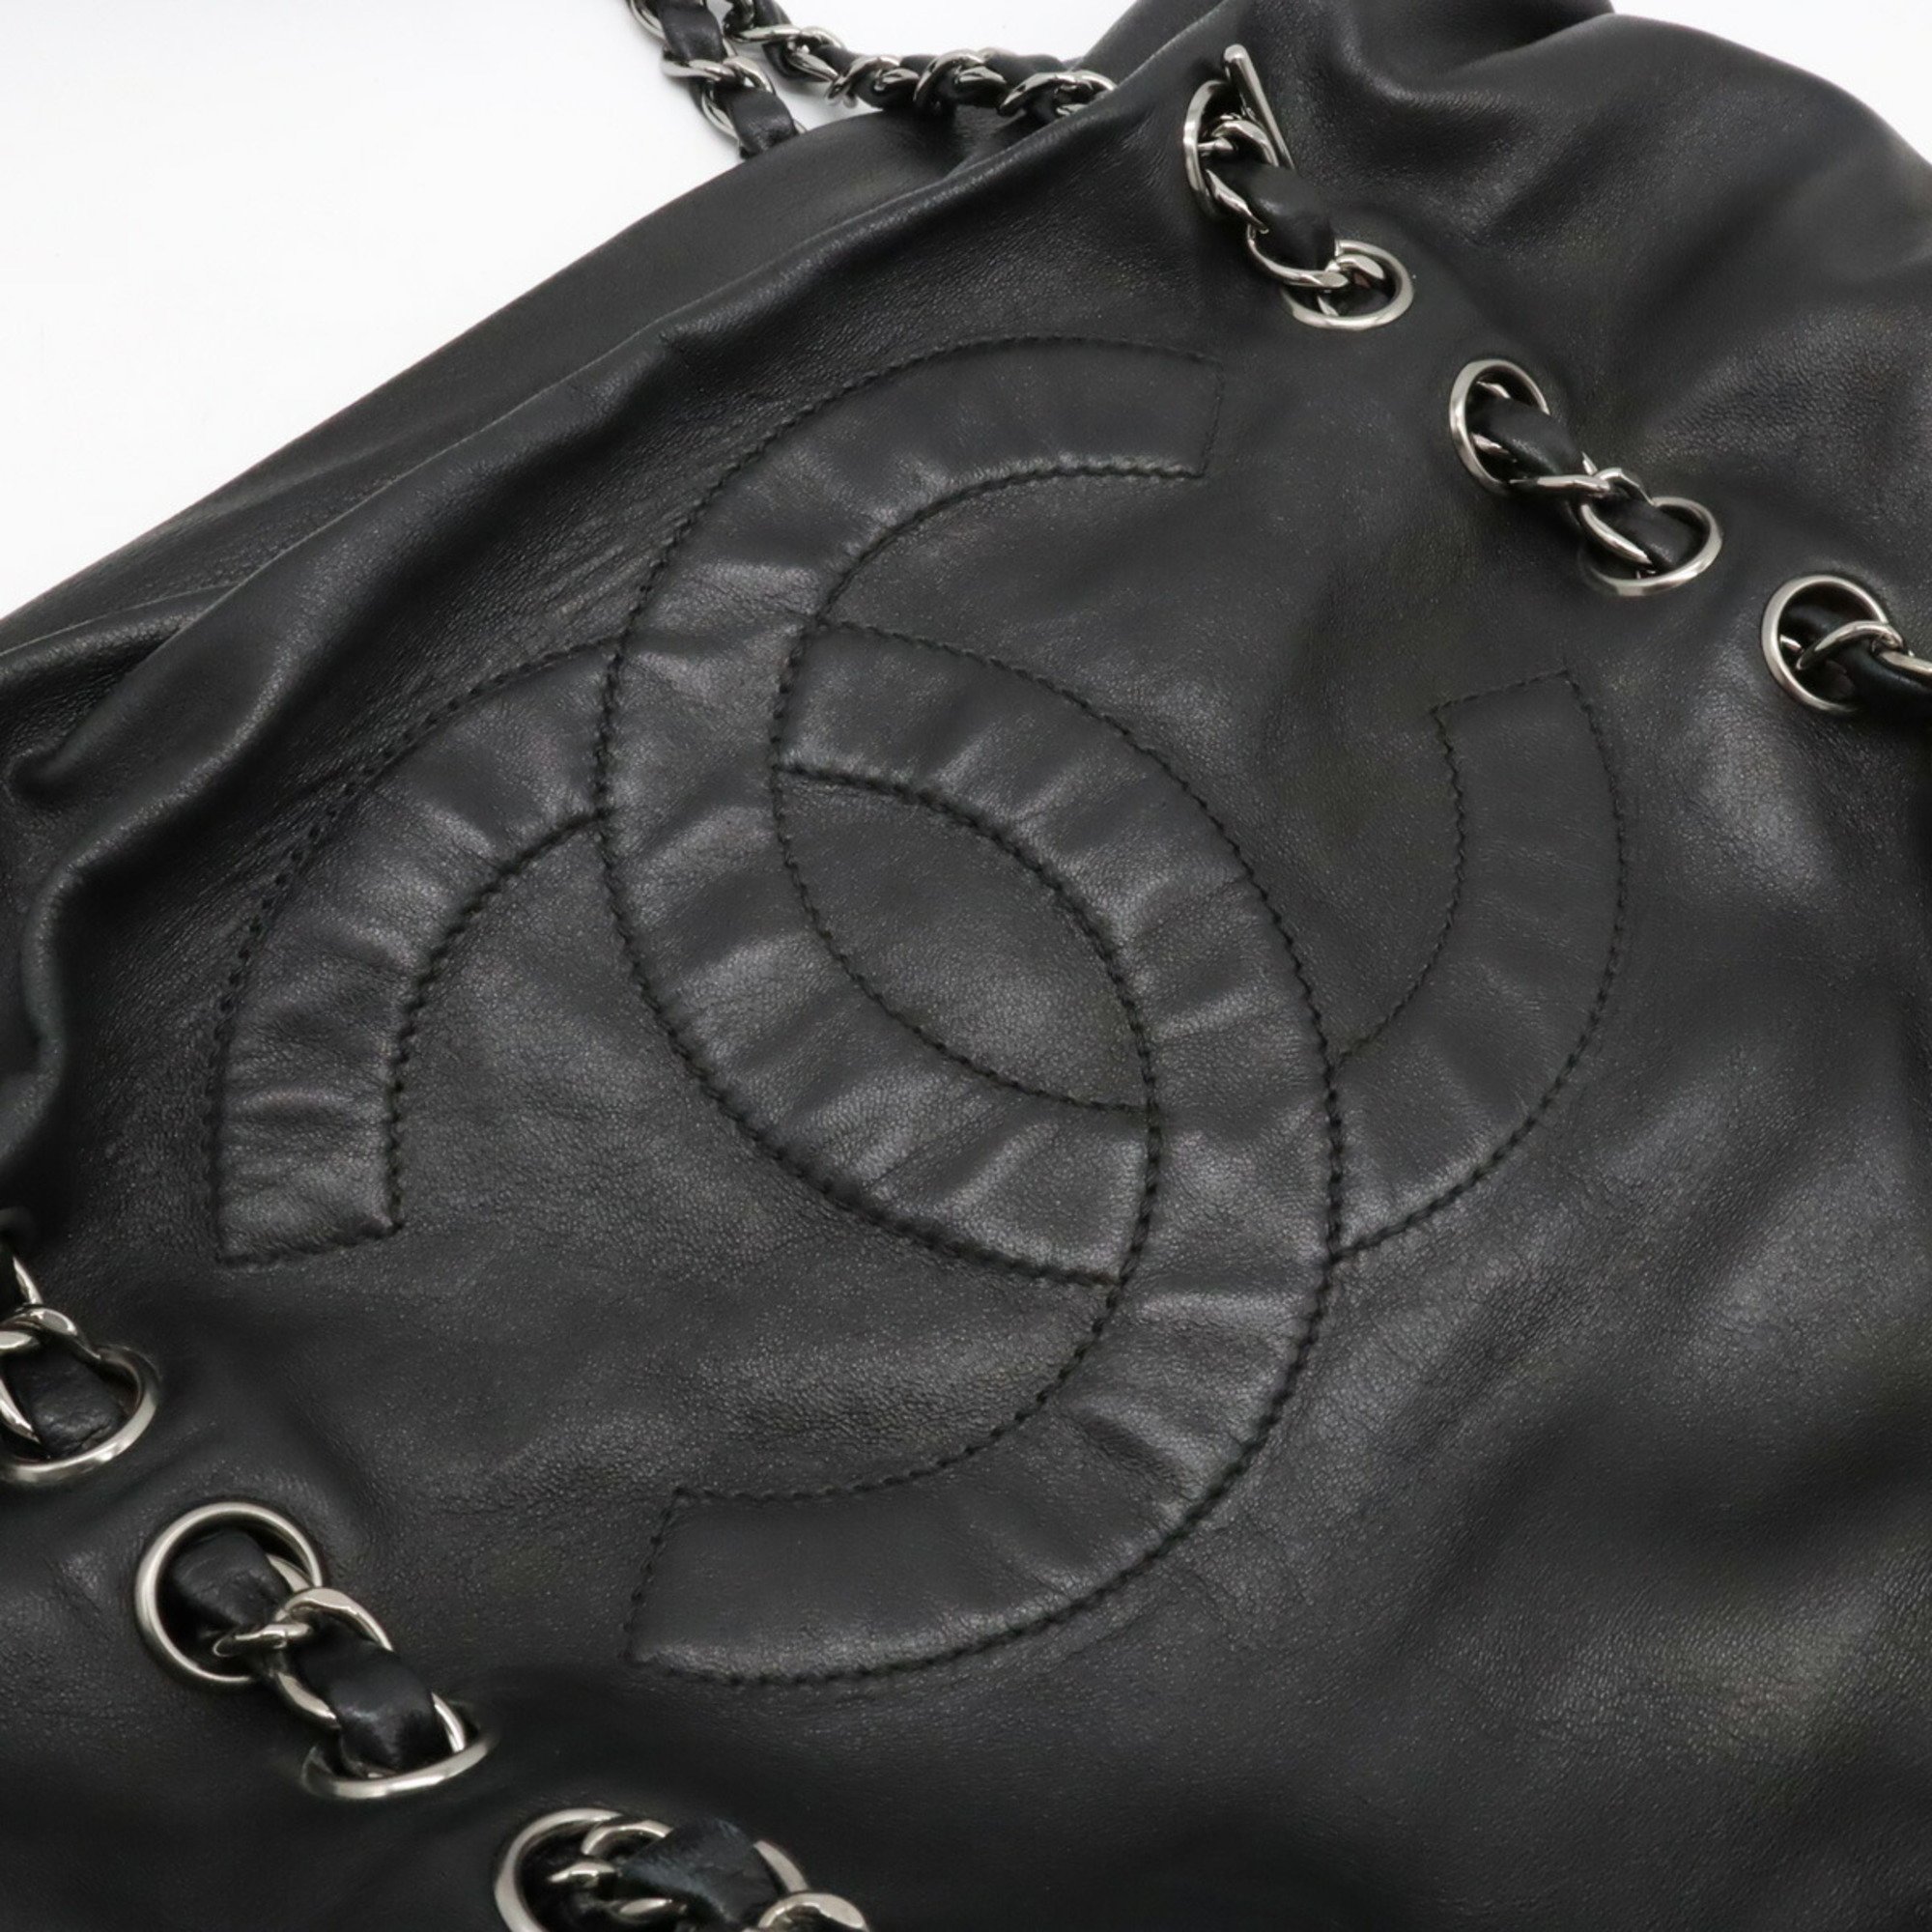 CHANEL COCO MARK GATHERED CHAIN TOTE BAG SHOULDER LEATHER BLACK